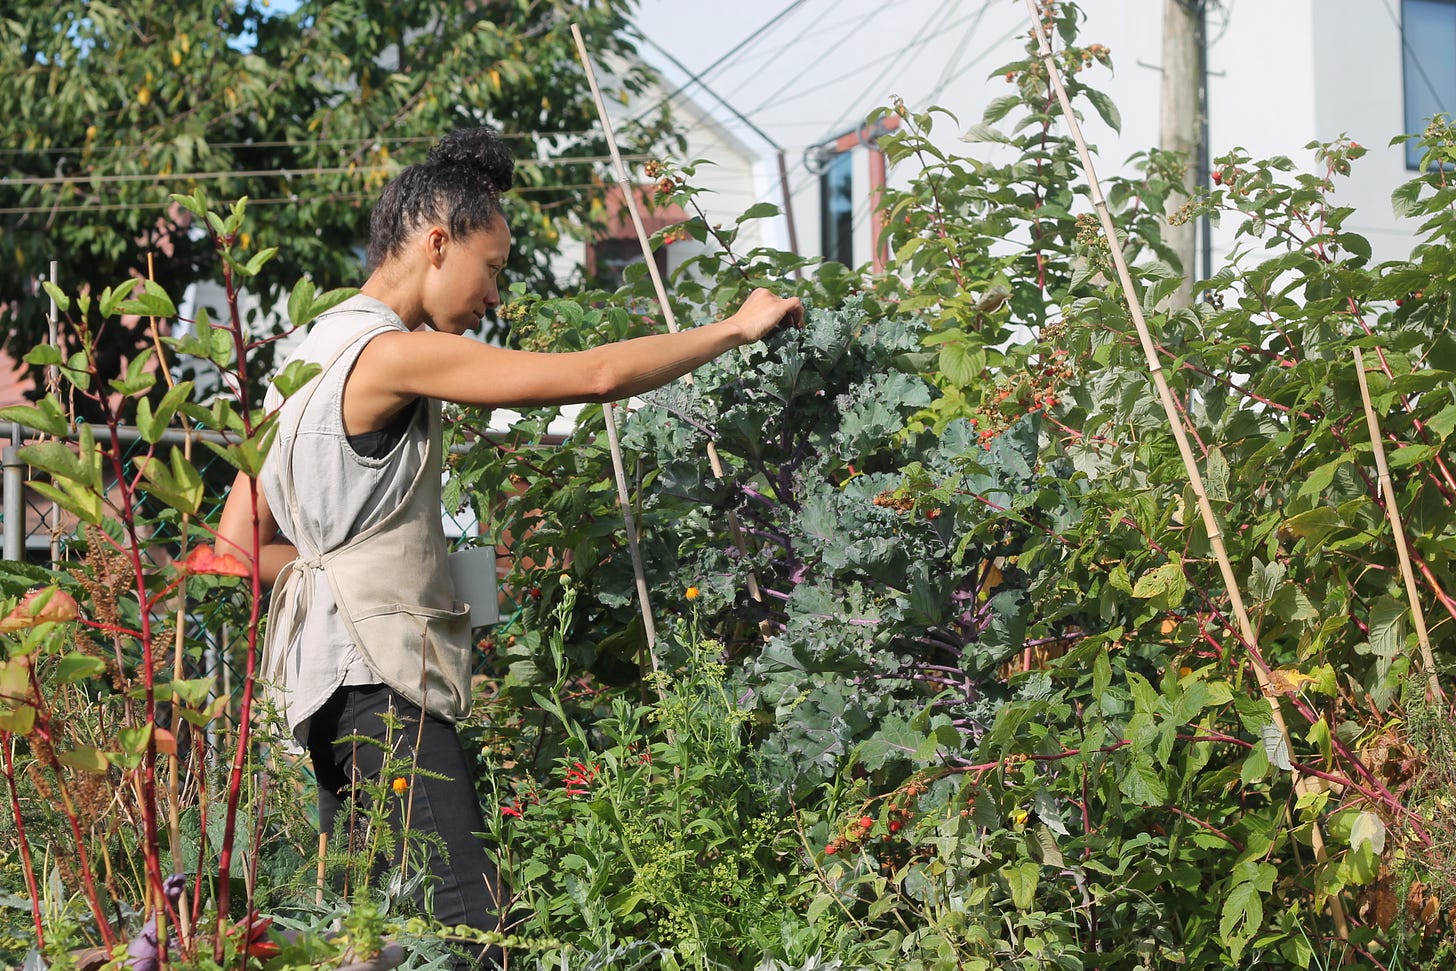 A middle-aged Black woman with her hair in a high bun inspects a kalette plant almost as tall as she is. She stands amidst densely planted beds or raspberries, calendula, chives.